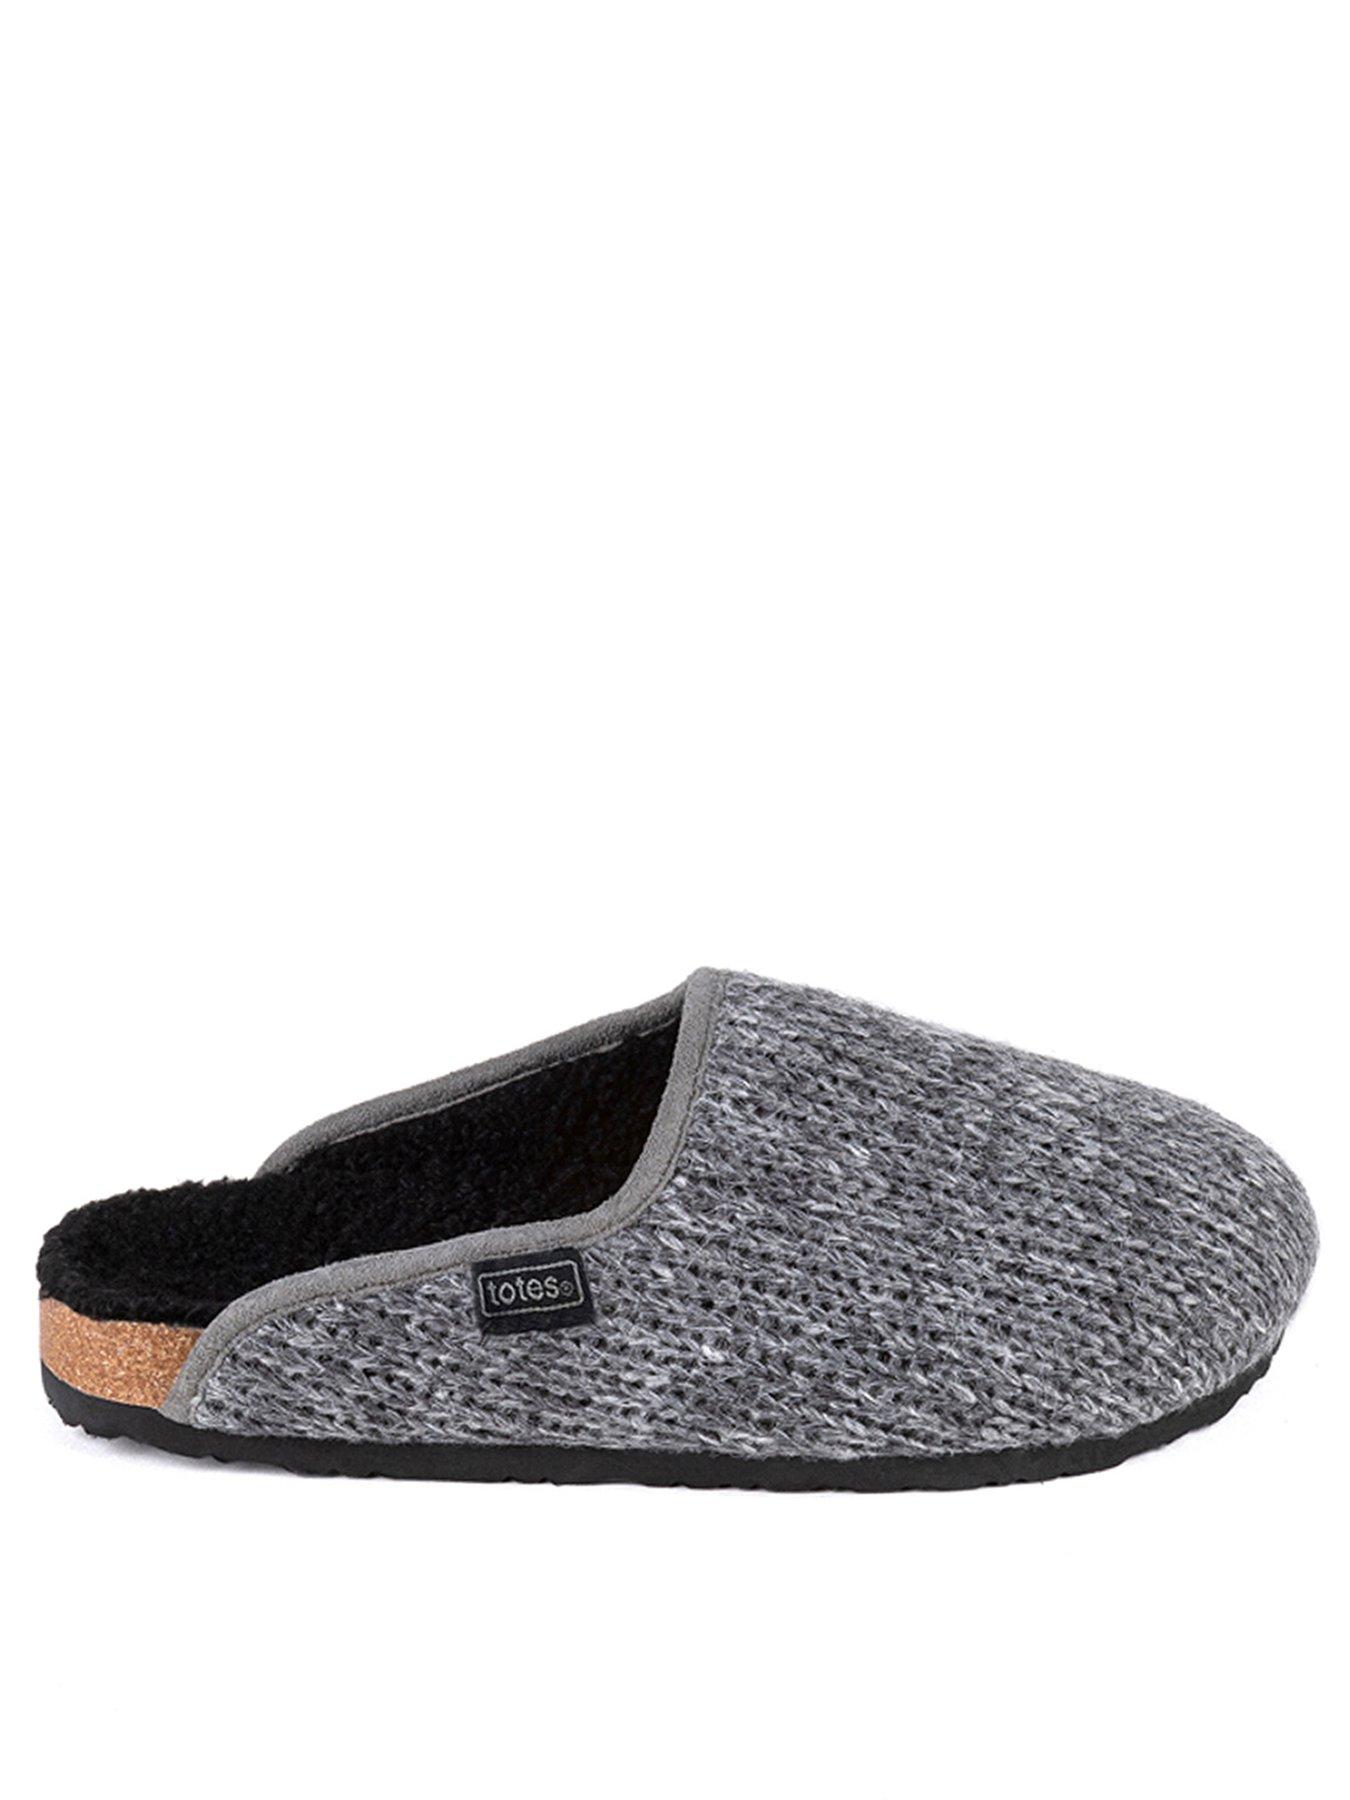 TOTES Totes Mens Knitted Mule Slipper & Eva Sole | littlewoodsireland.ie